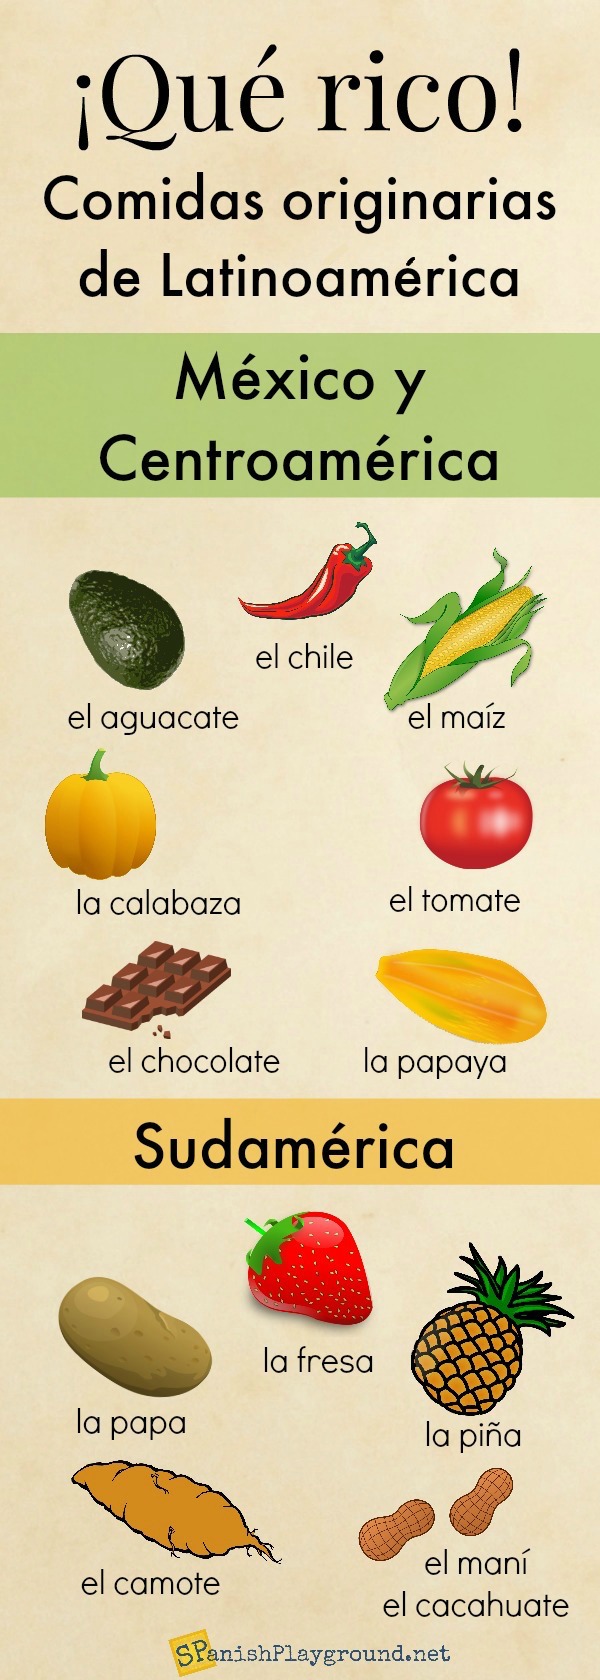 Use this infographic of food from Latin America to practice vocabualry and learn about culture.